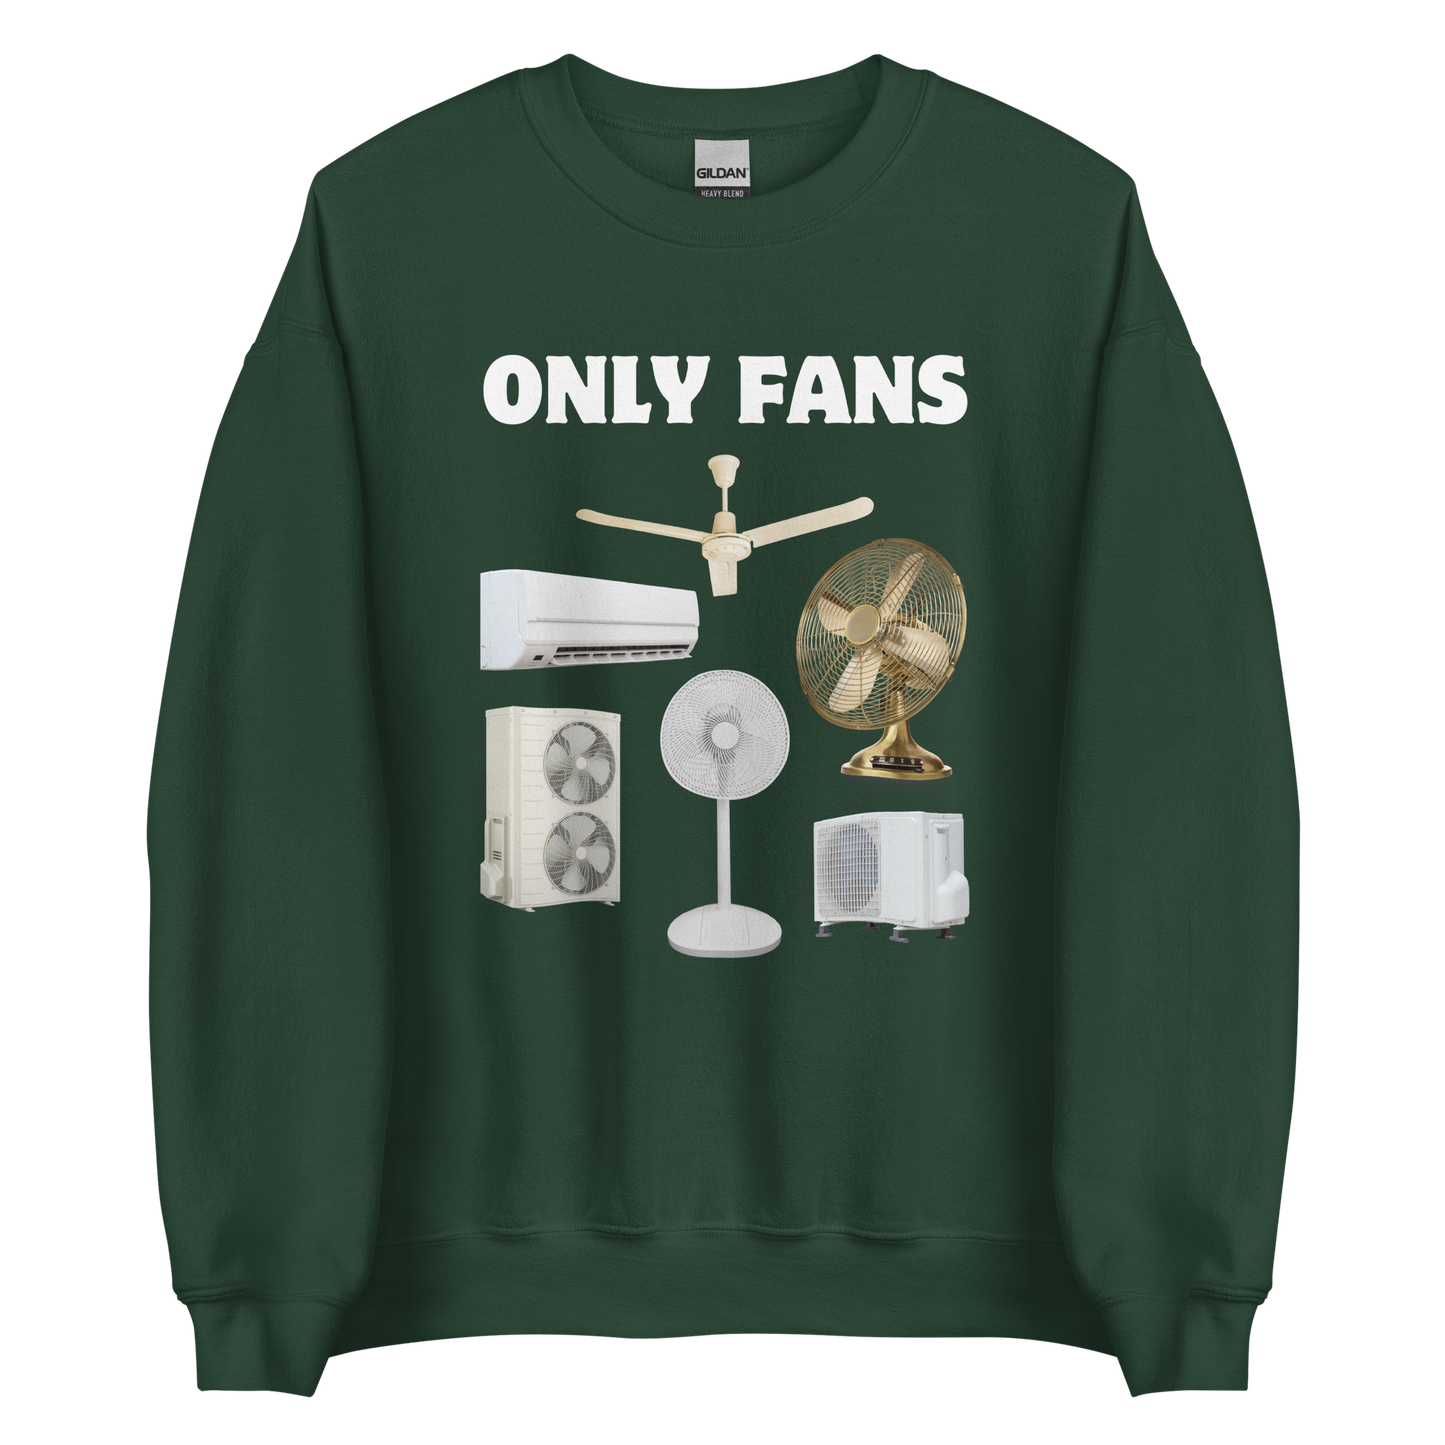 Forest Green Only Fans Sweatshirt featuring a fun Fans graphic on the chest - Best Graphic Sweatshirts - Boozy Fox